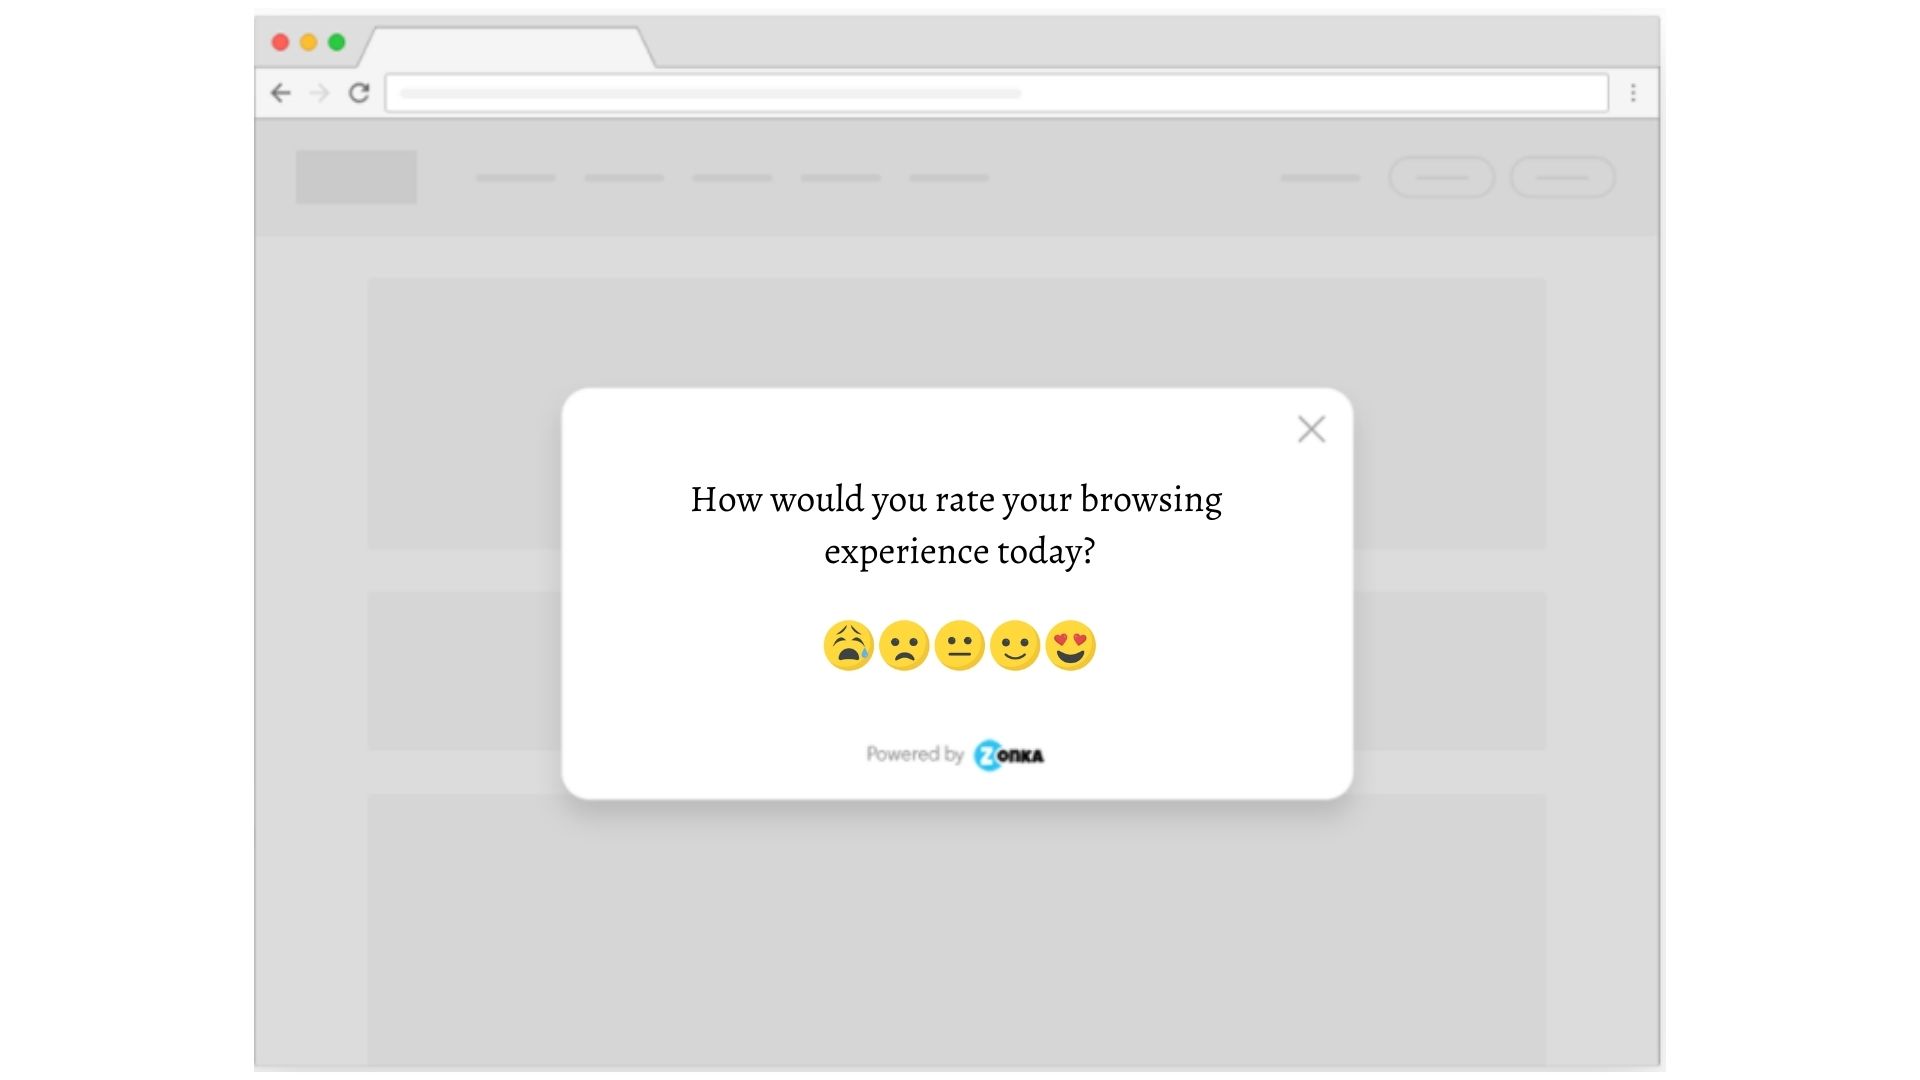 Microsurvey to collect quick pulse on browsing experience